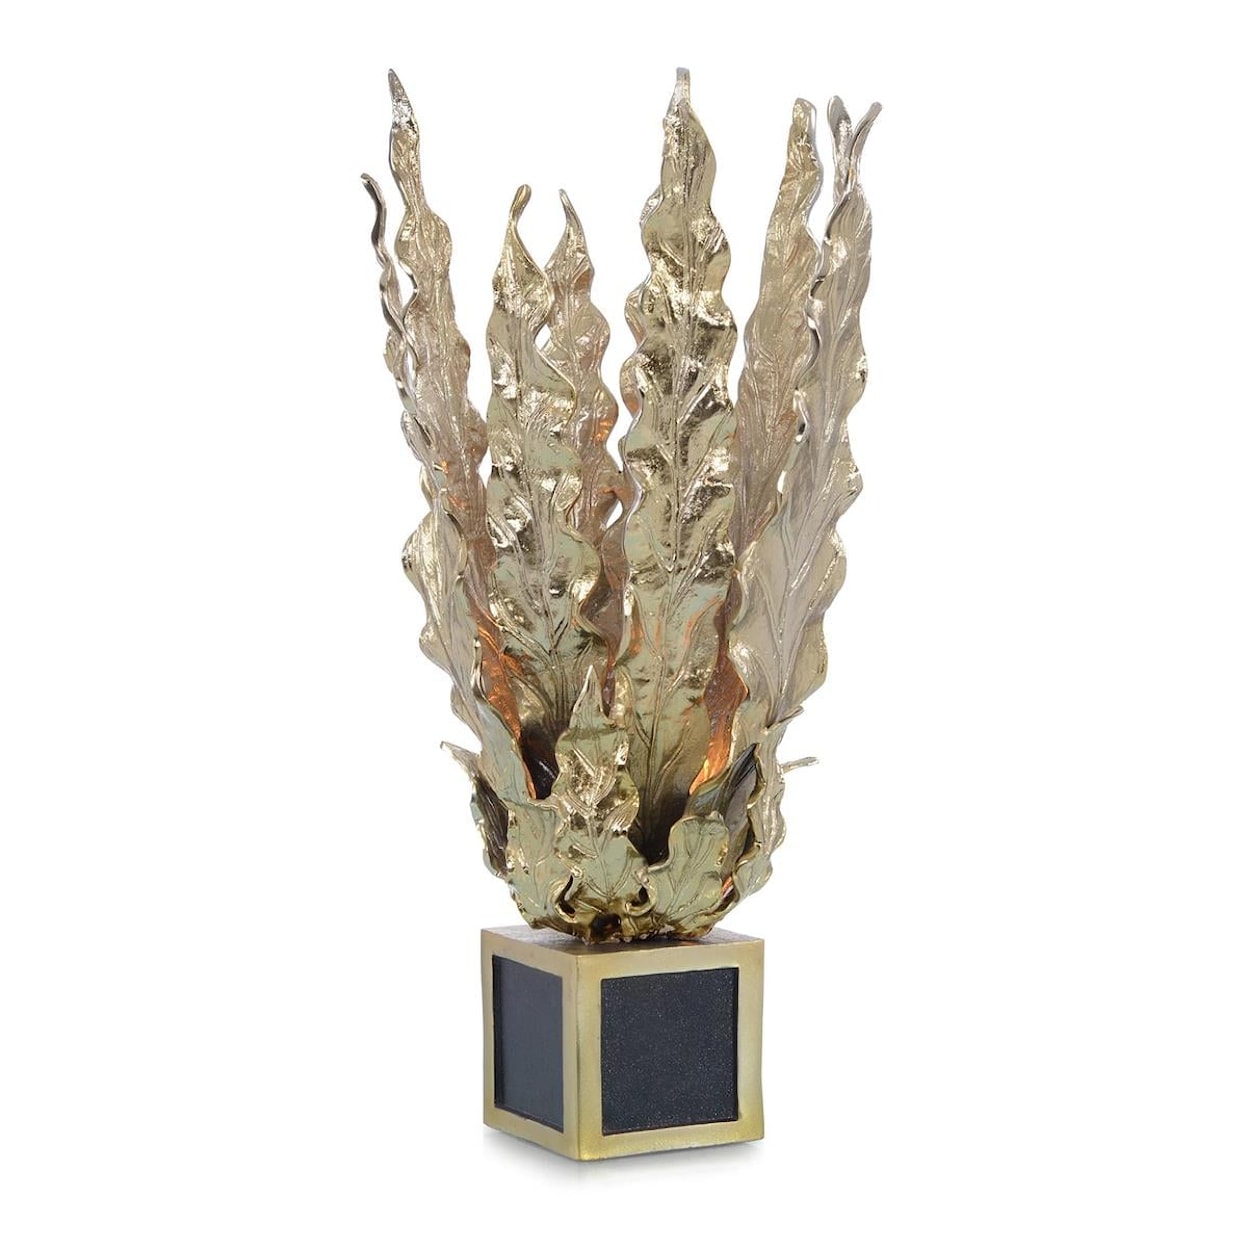 John-Richard Accessories & Botanicals HANDCRAFTED LEAVES ACCENT LAMP IN BRASS